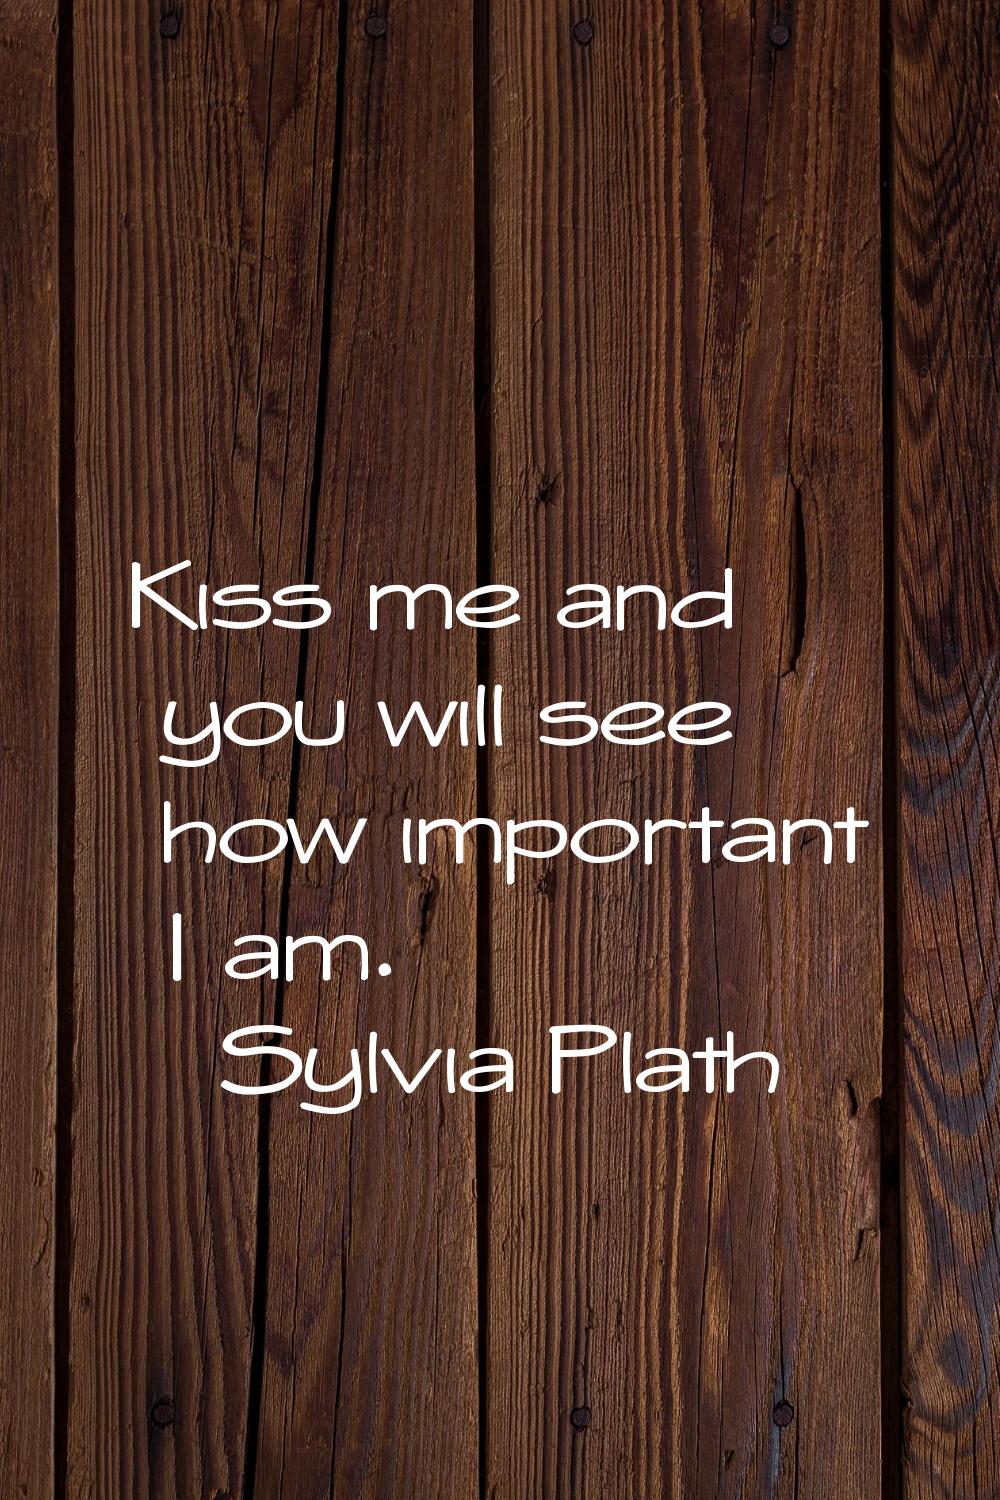 Kiss me and you will see how important I am.